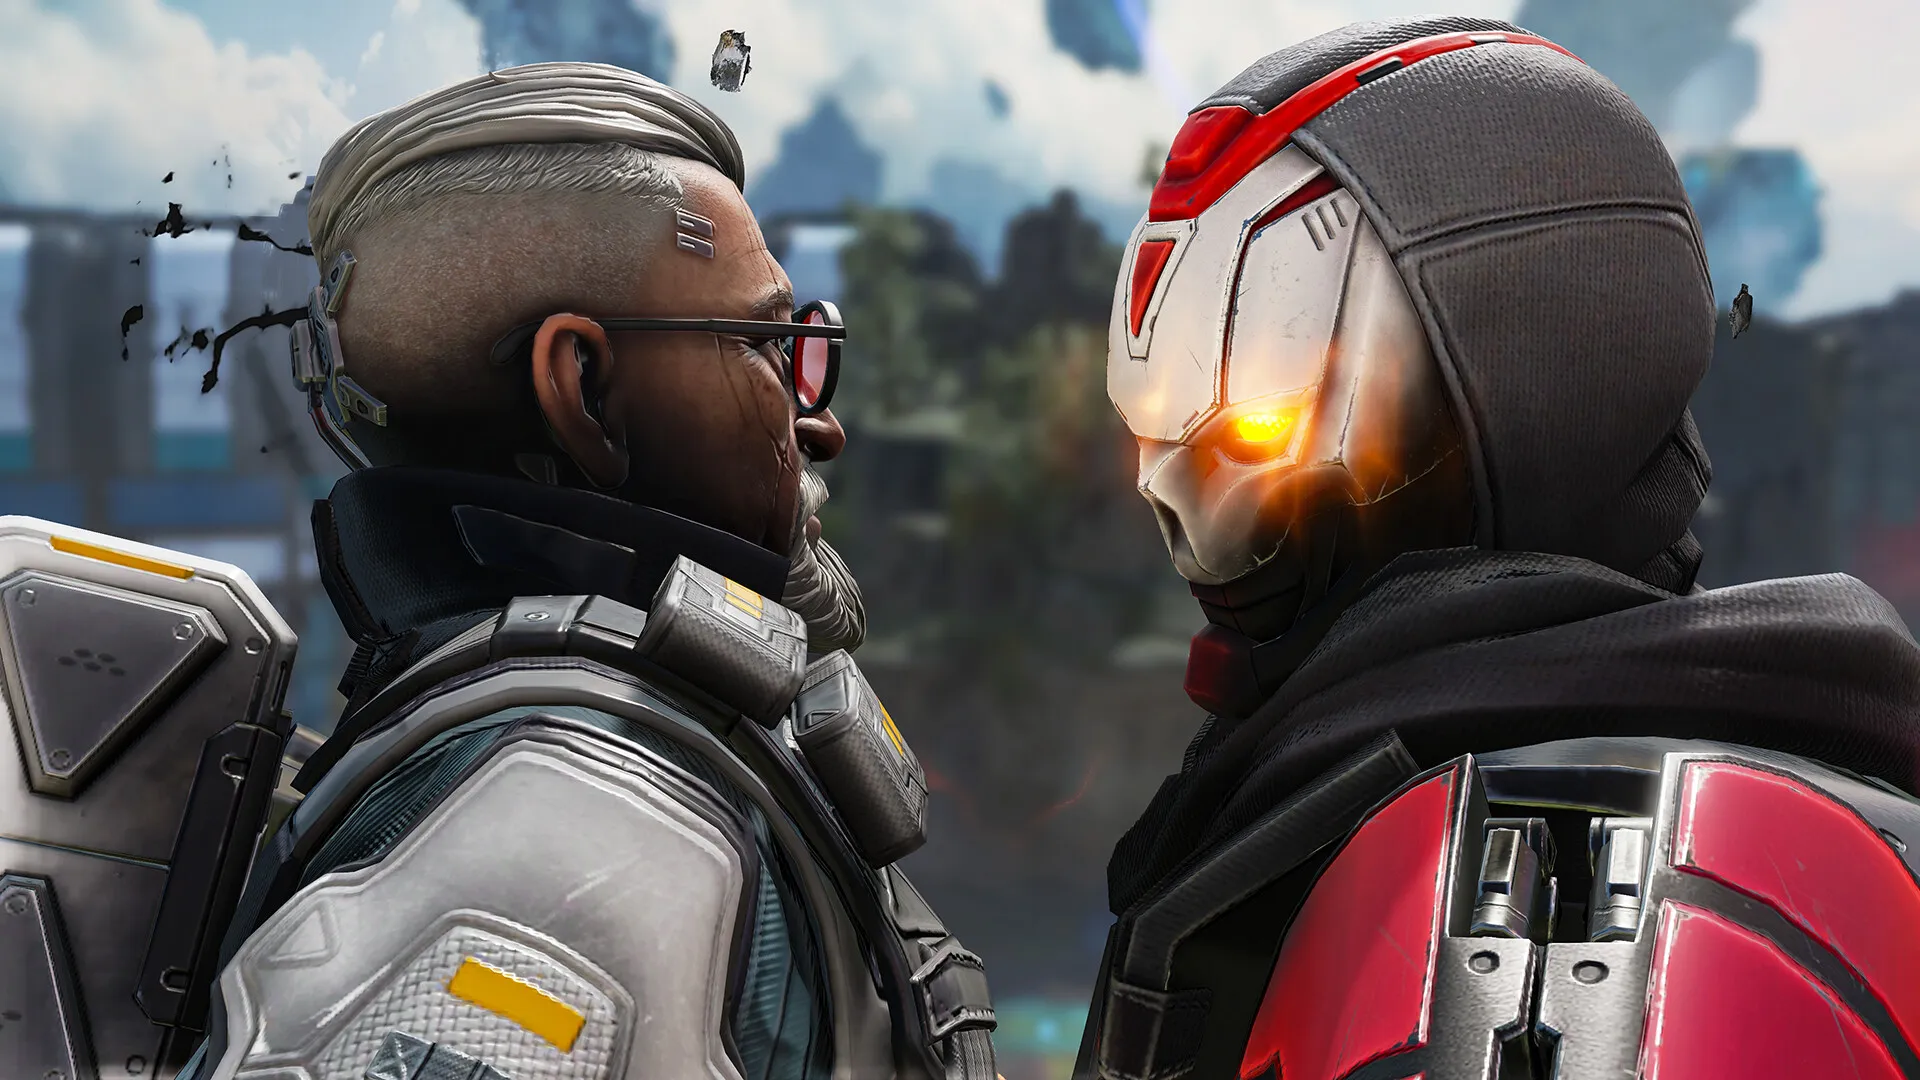 The third season of Apex Legends will be launching on October 1